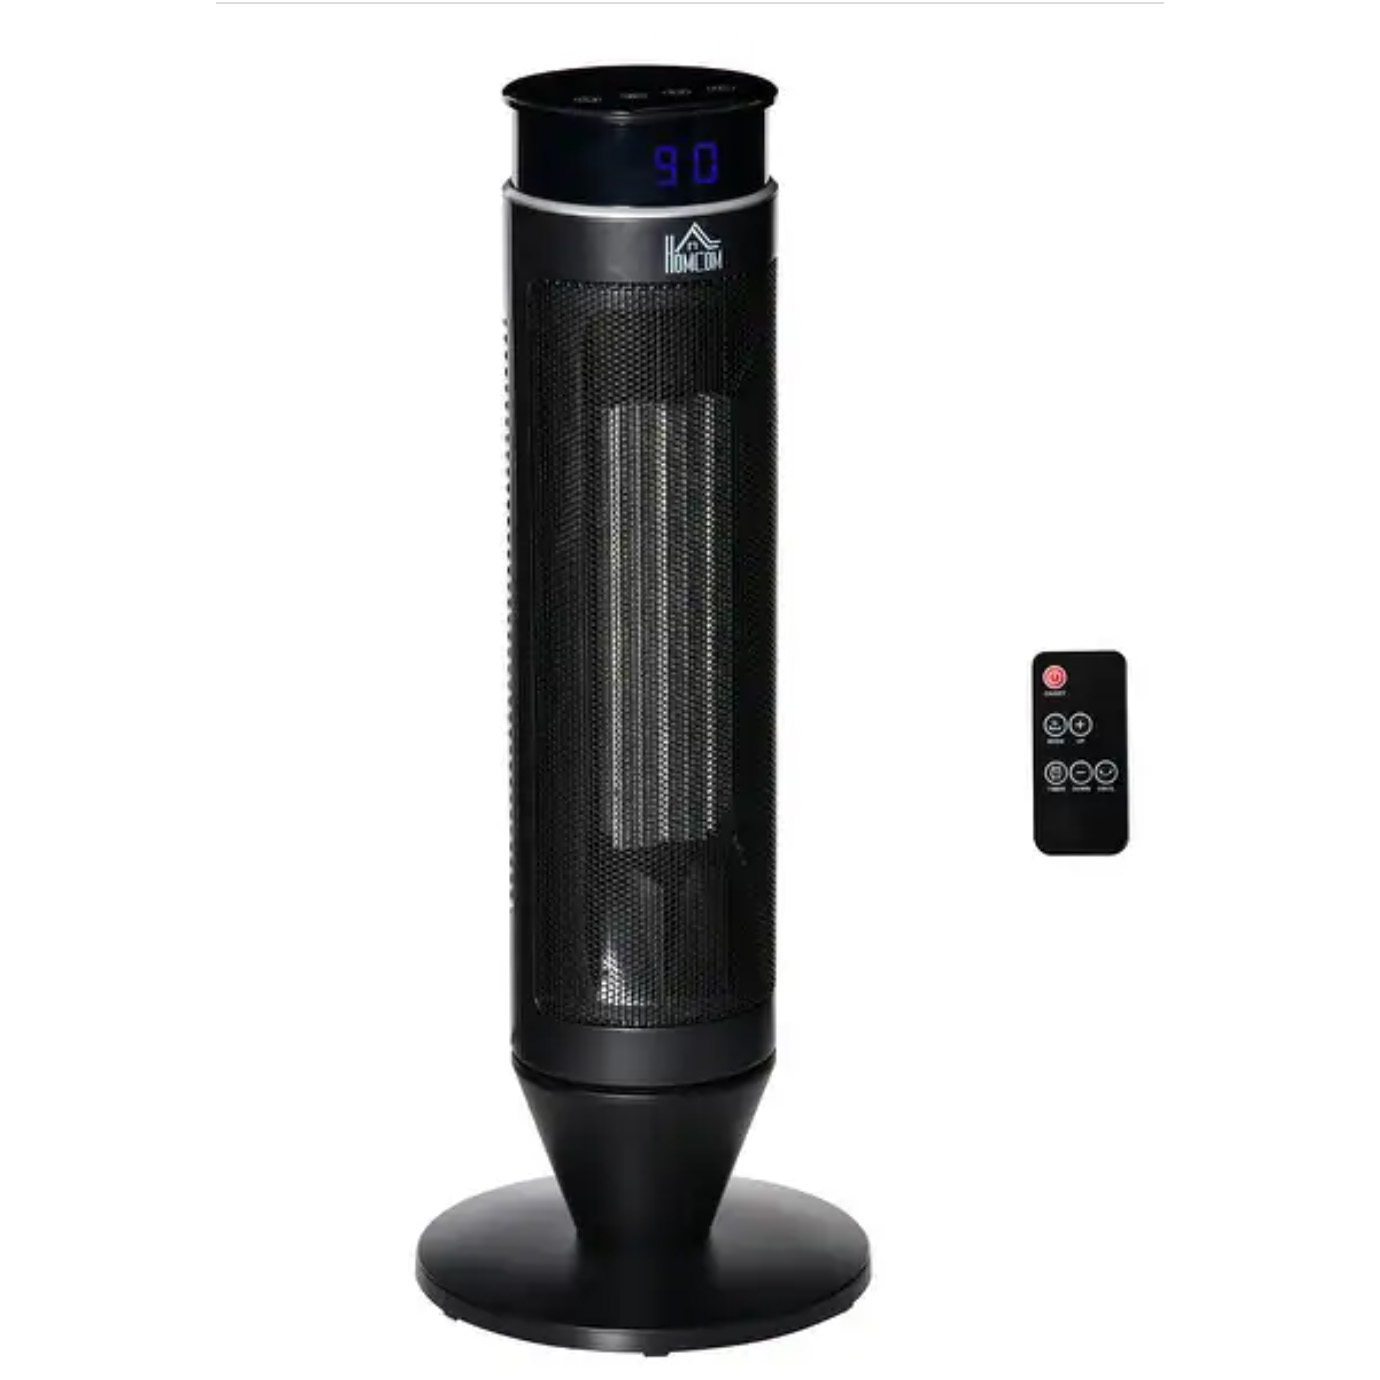 Black cylinder heater on stand with remote control